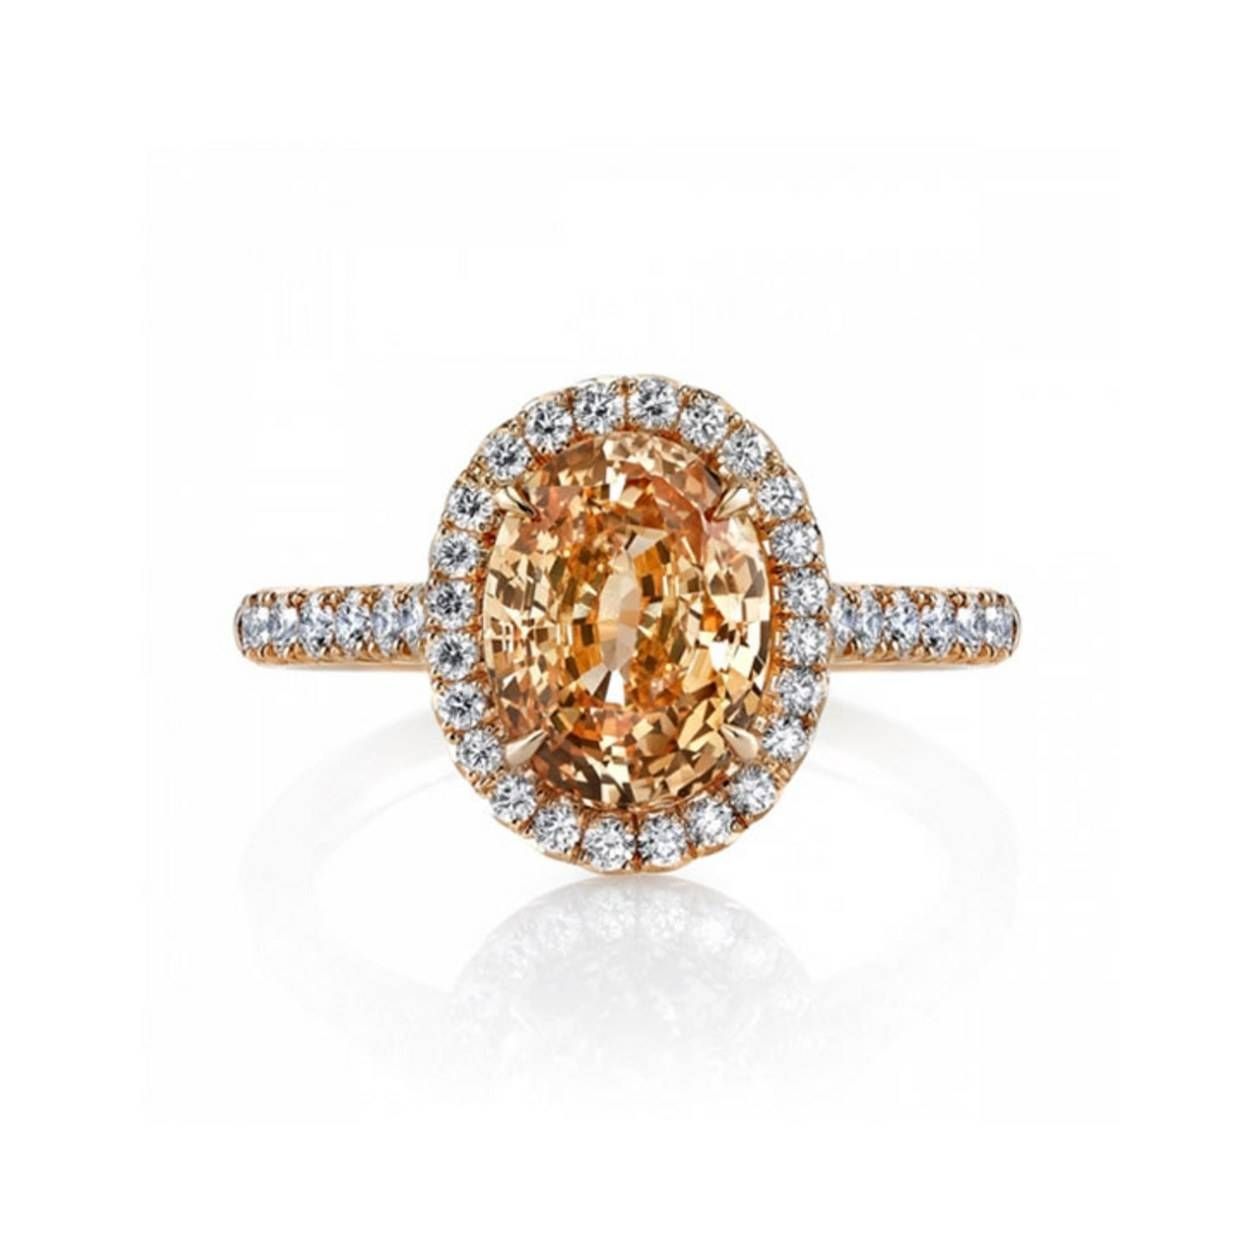 Unique Engagement Rings: Colored Gemstone Engagement Rings | Glamour Pertaining To Engagement Rings With Yellow Stone (View 12 of 15)